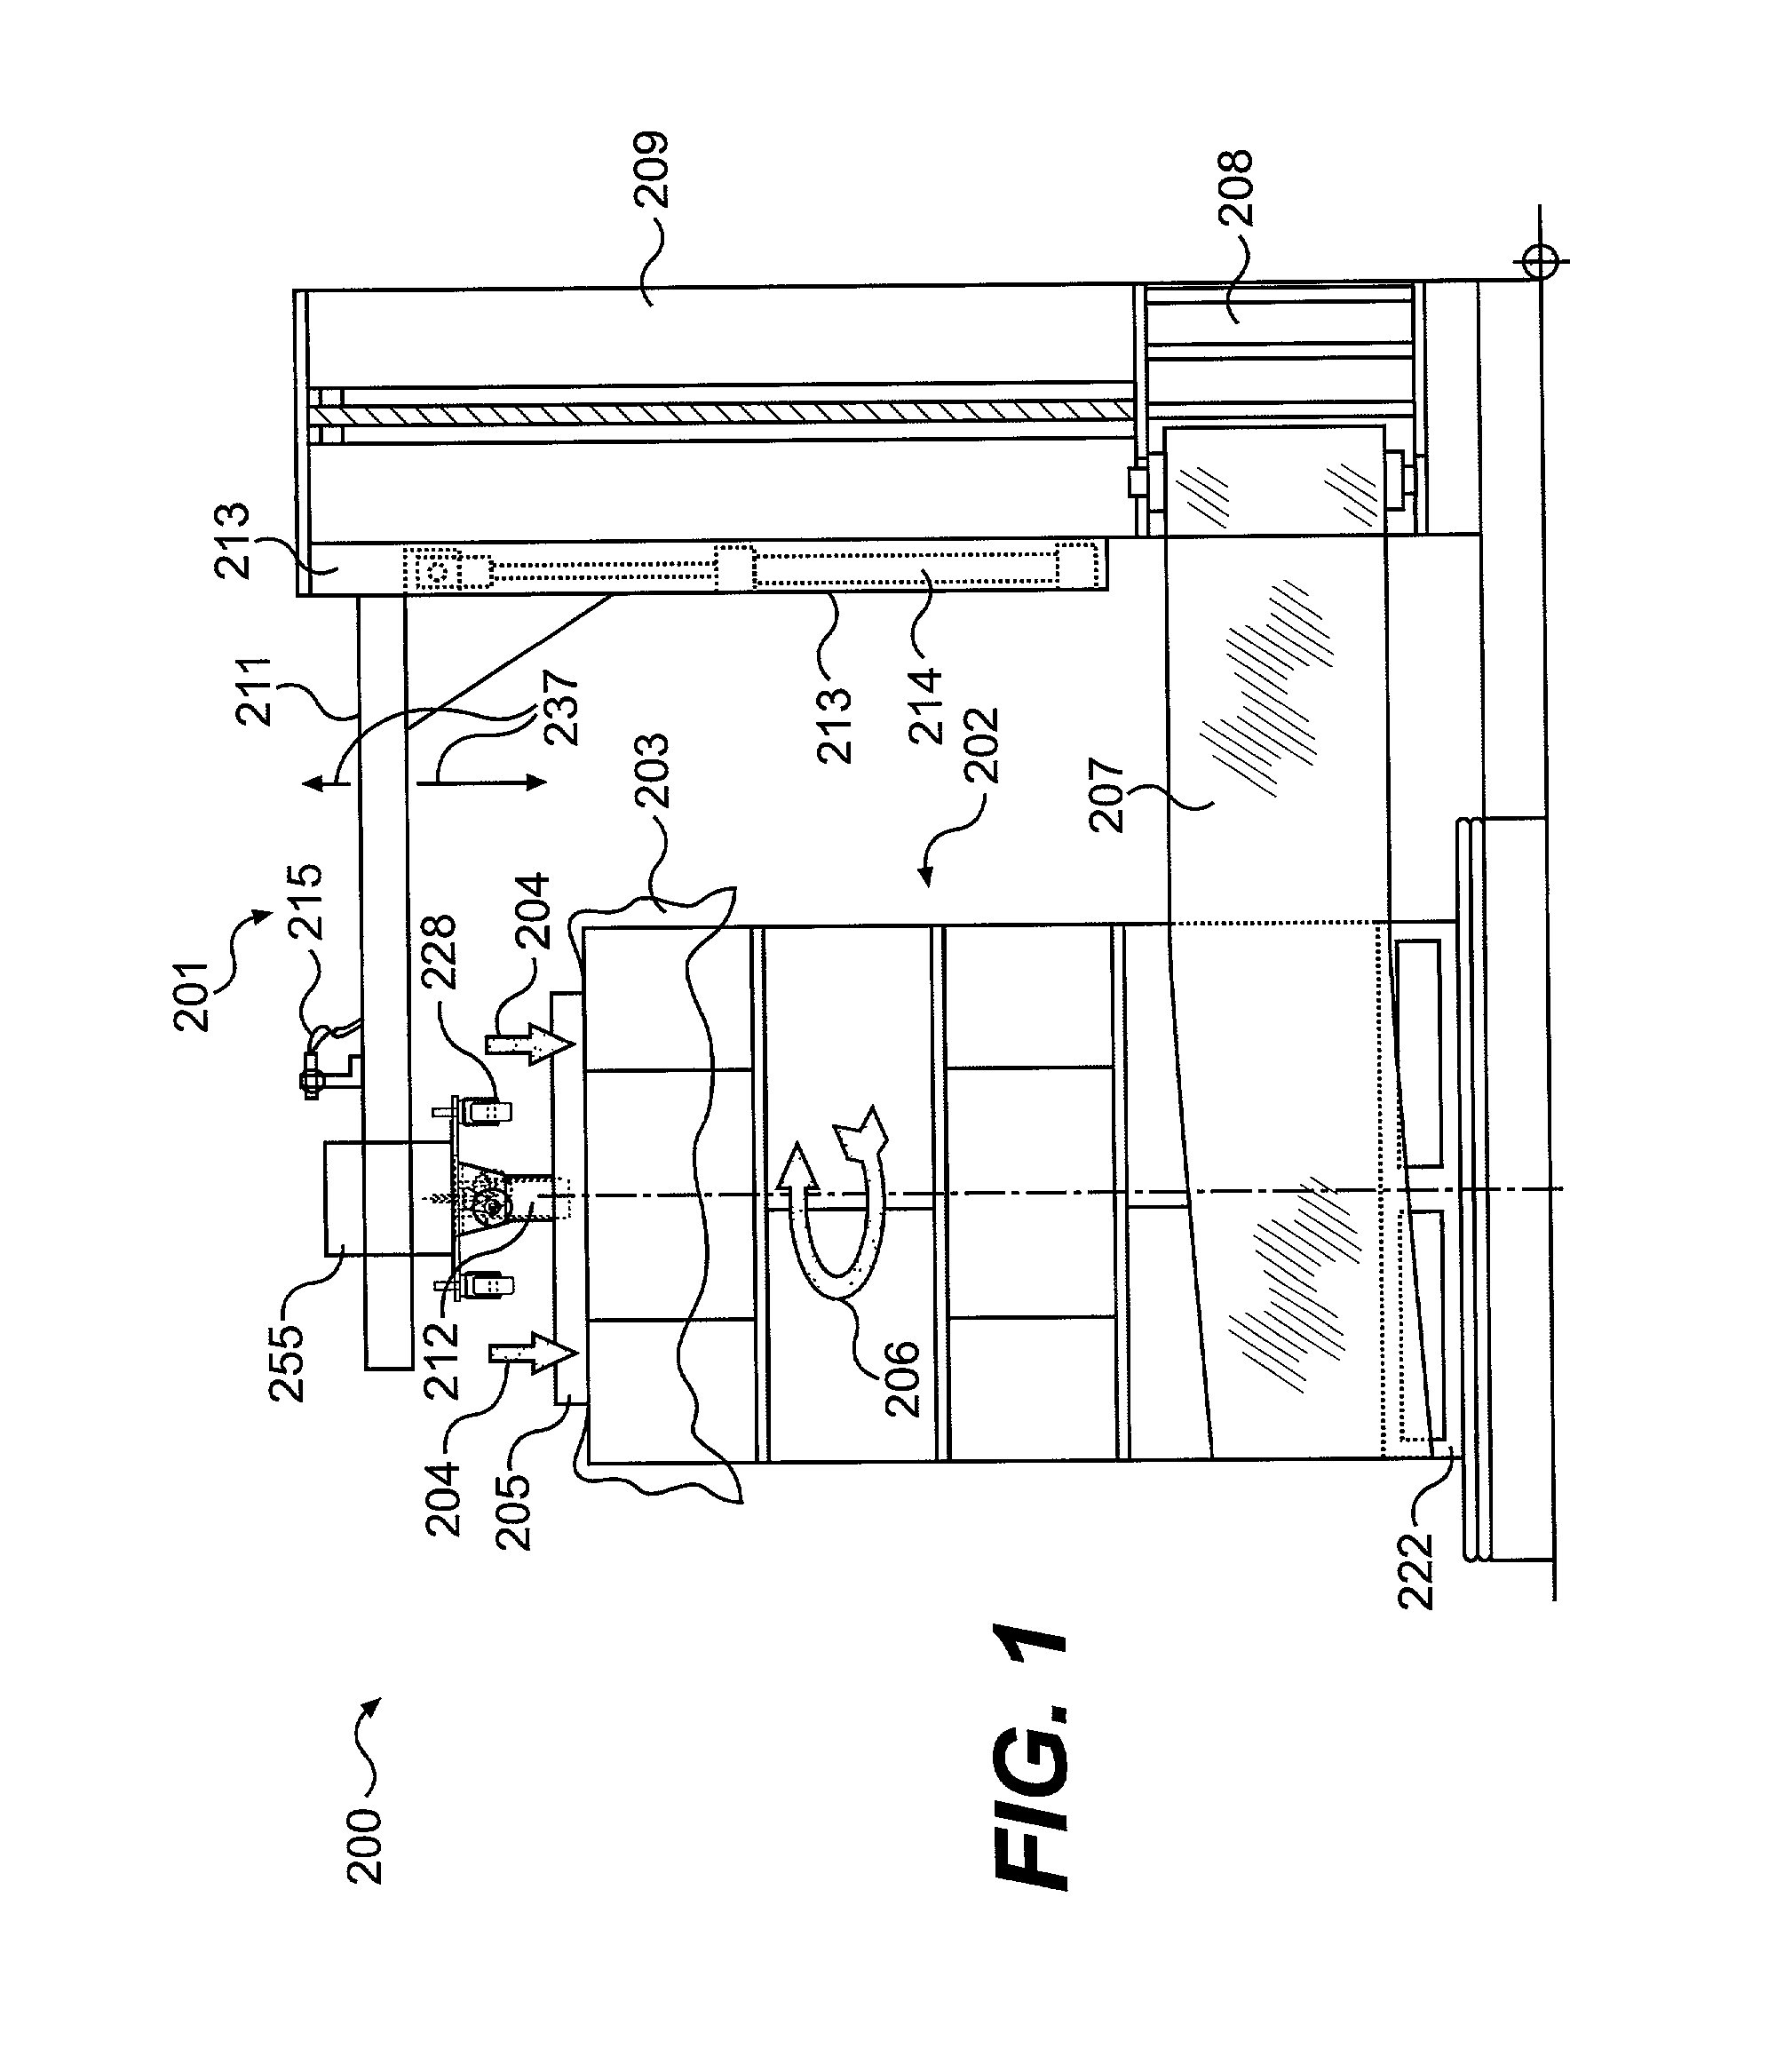 Method and apparatus for stretch wrapping a load, including a top platen